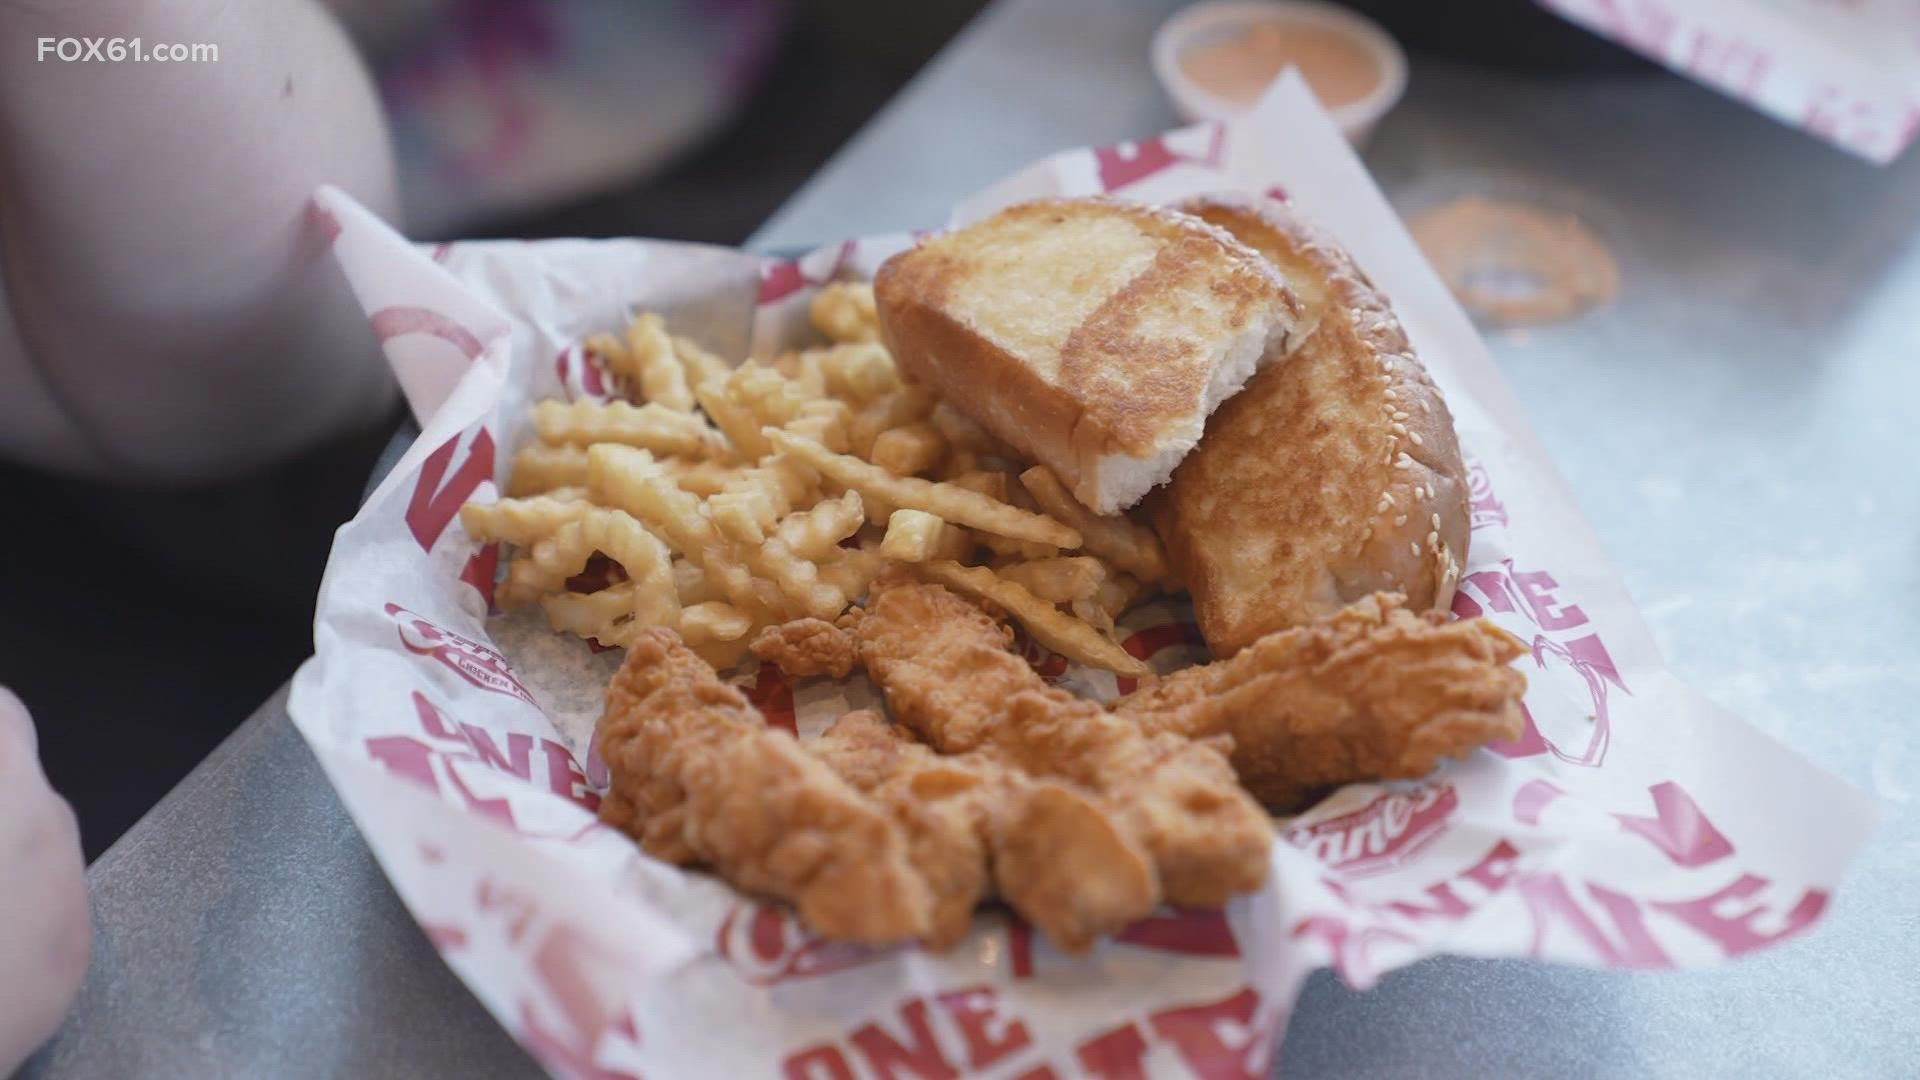 A national fast-food restaurant is bringing its chicken game to Connecticut.